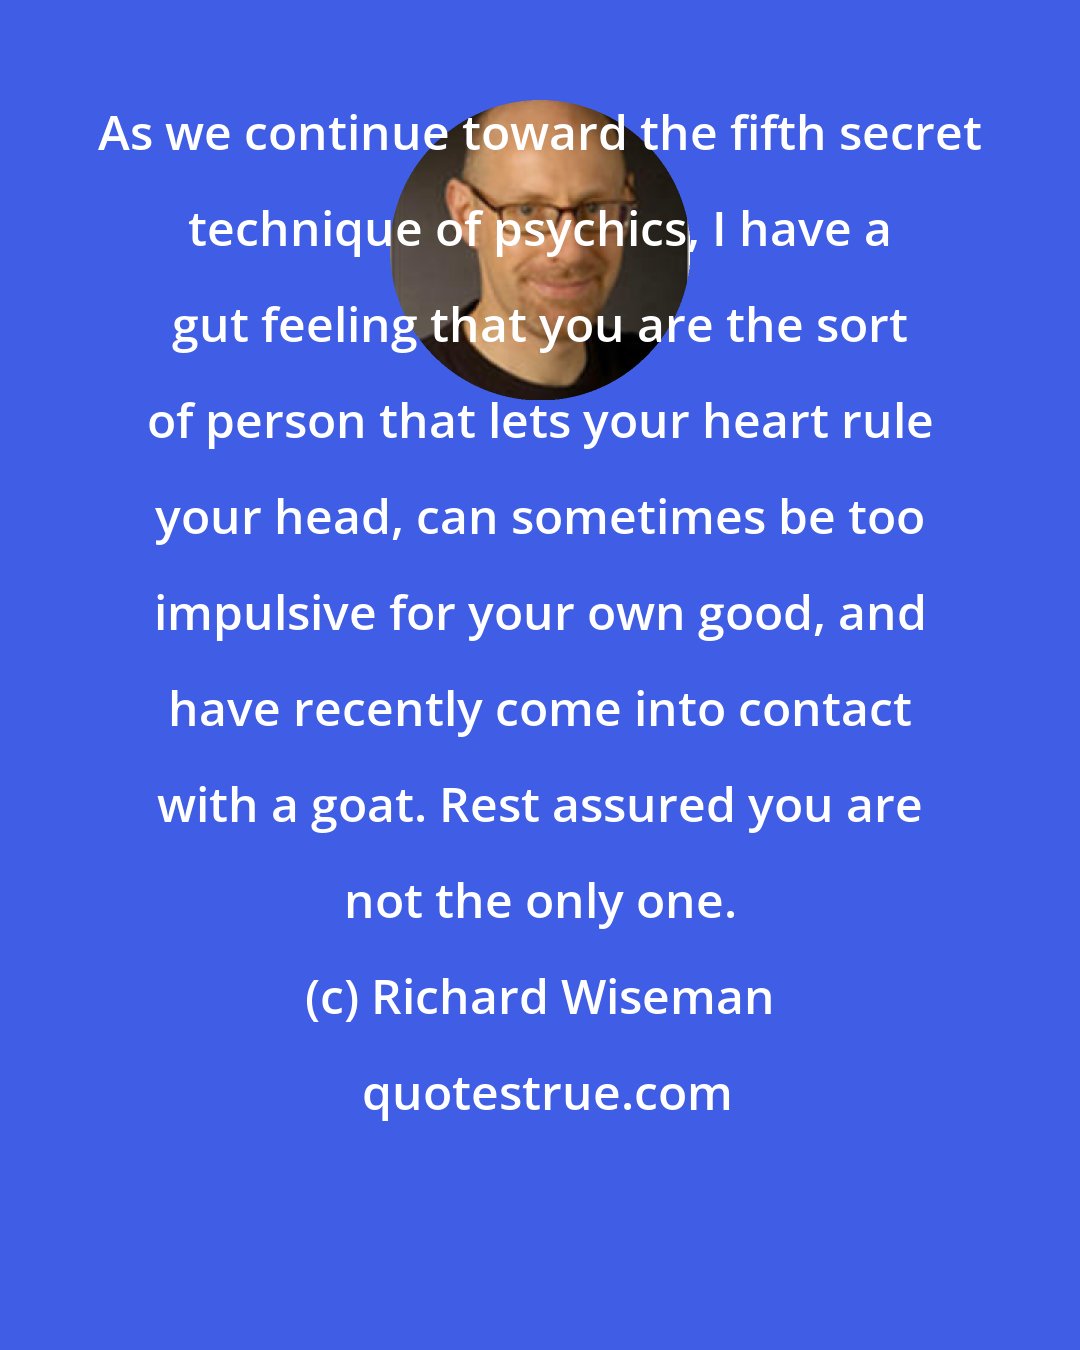 Richard Wiseman: As we continue toward the fifth secret technique of psychics, I have a gut feeling that you are the sort of person that lets your heart rule your head, can sometimes be too impulsive for your own good, and have recently come into contact with a goat. Rest assured you are not the only one.